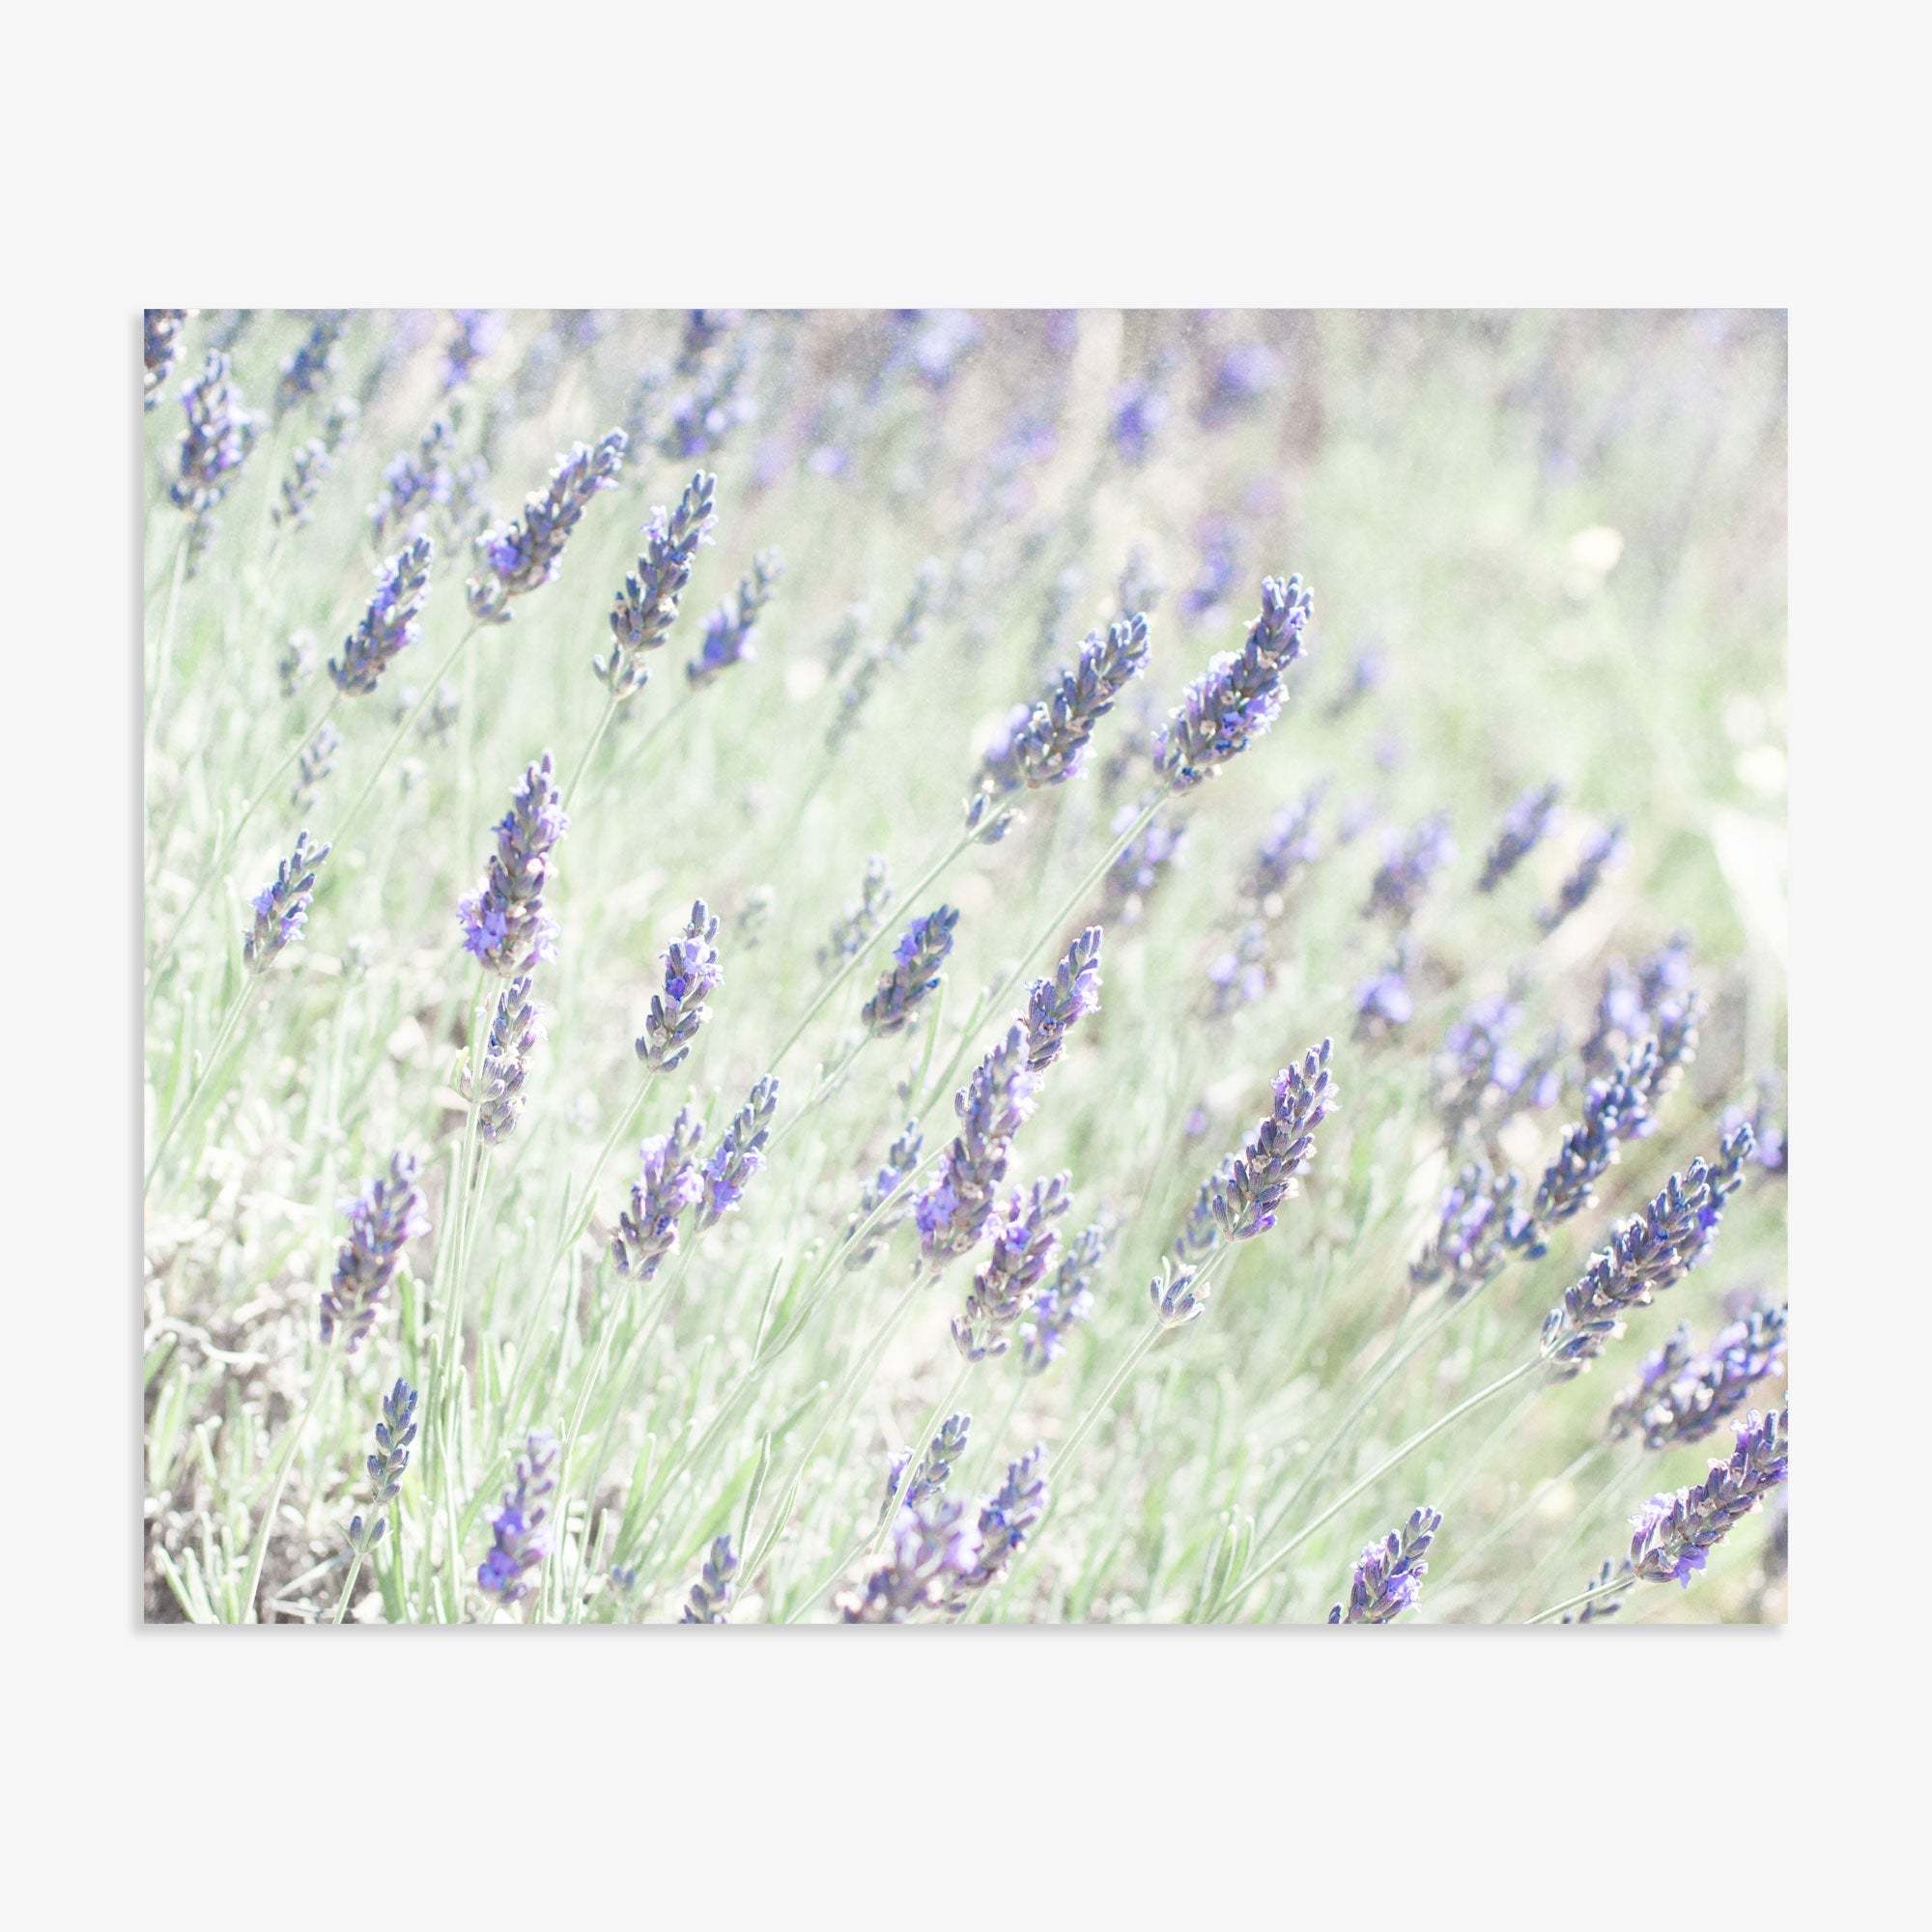 A tranquil image of a Floral Purple Print, &#39;Lavender for LaLa&#39; field with purple blooms against a soft green and white background, conveying a serene and lush garden vibe, printed on archival photographic paper by Offley Green.